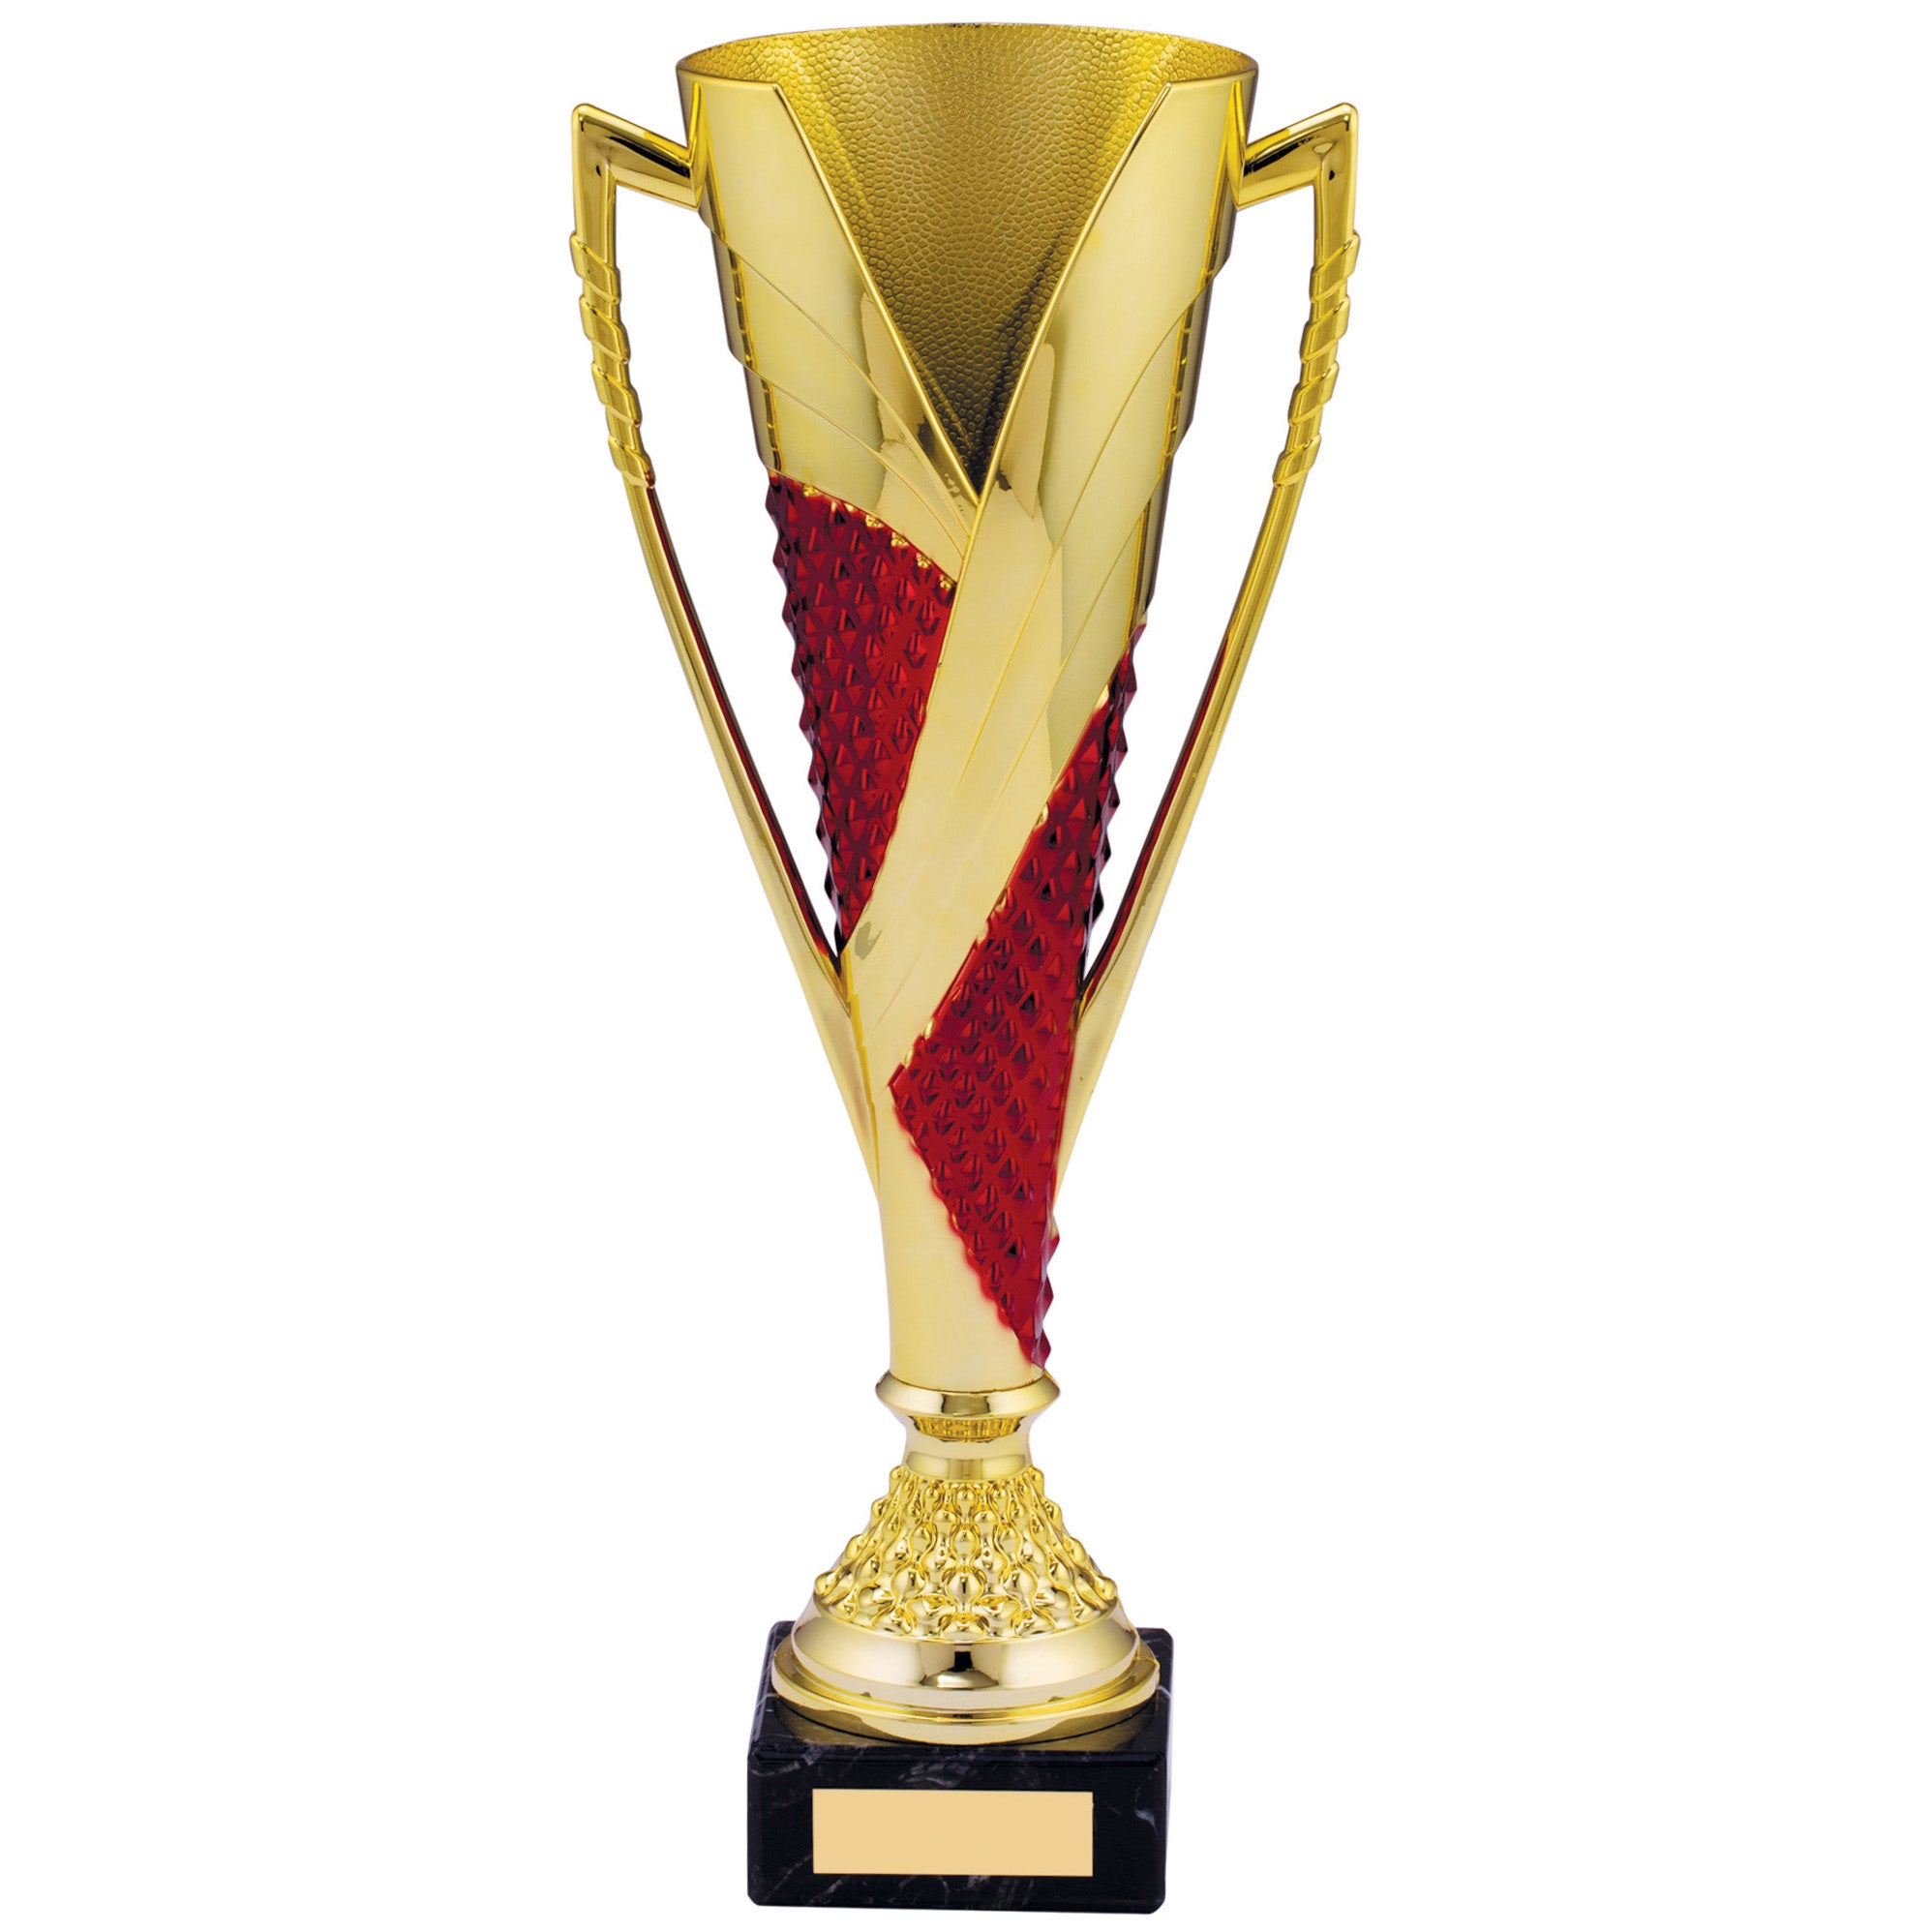 Gold Plastic Trophy Cup with Red Texture on Black Marble Base